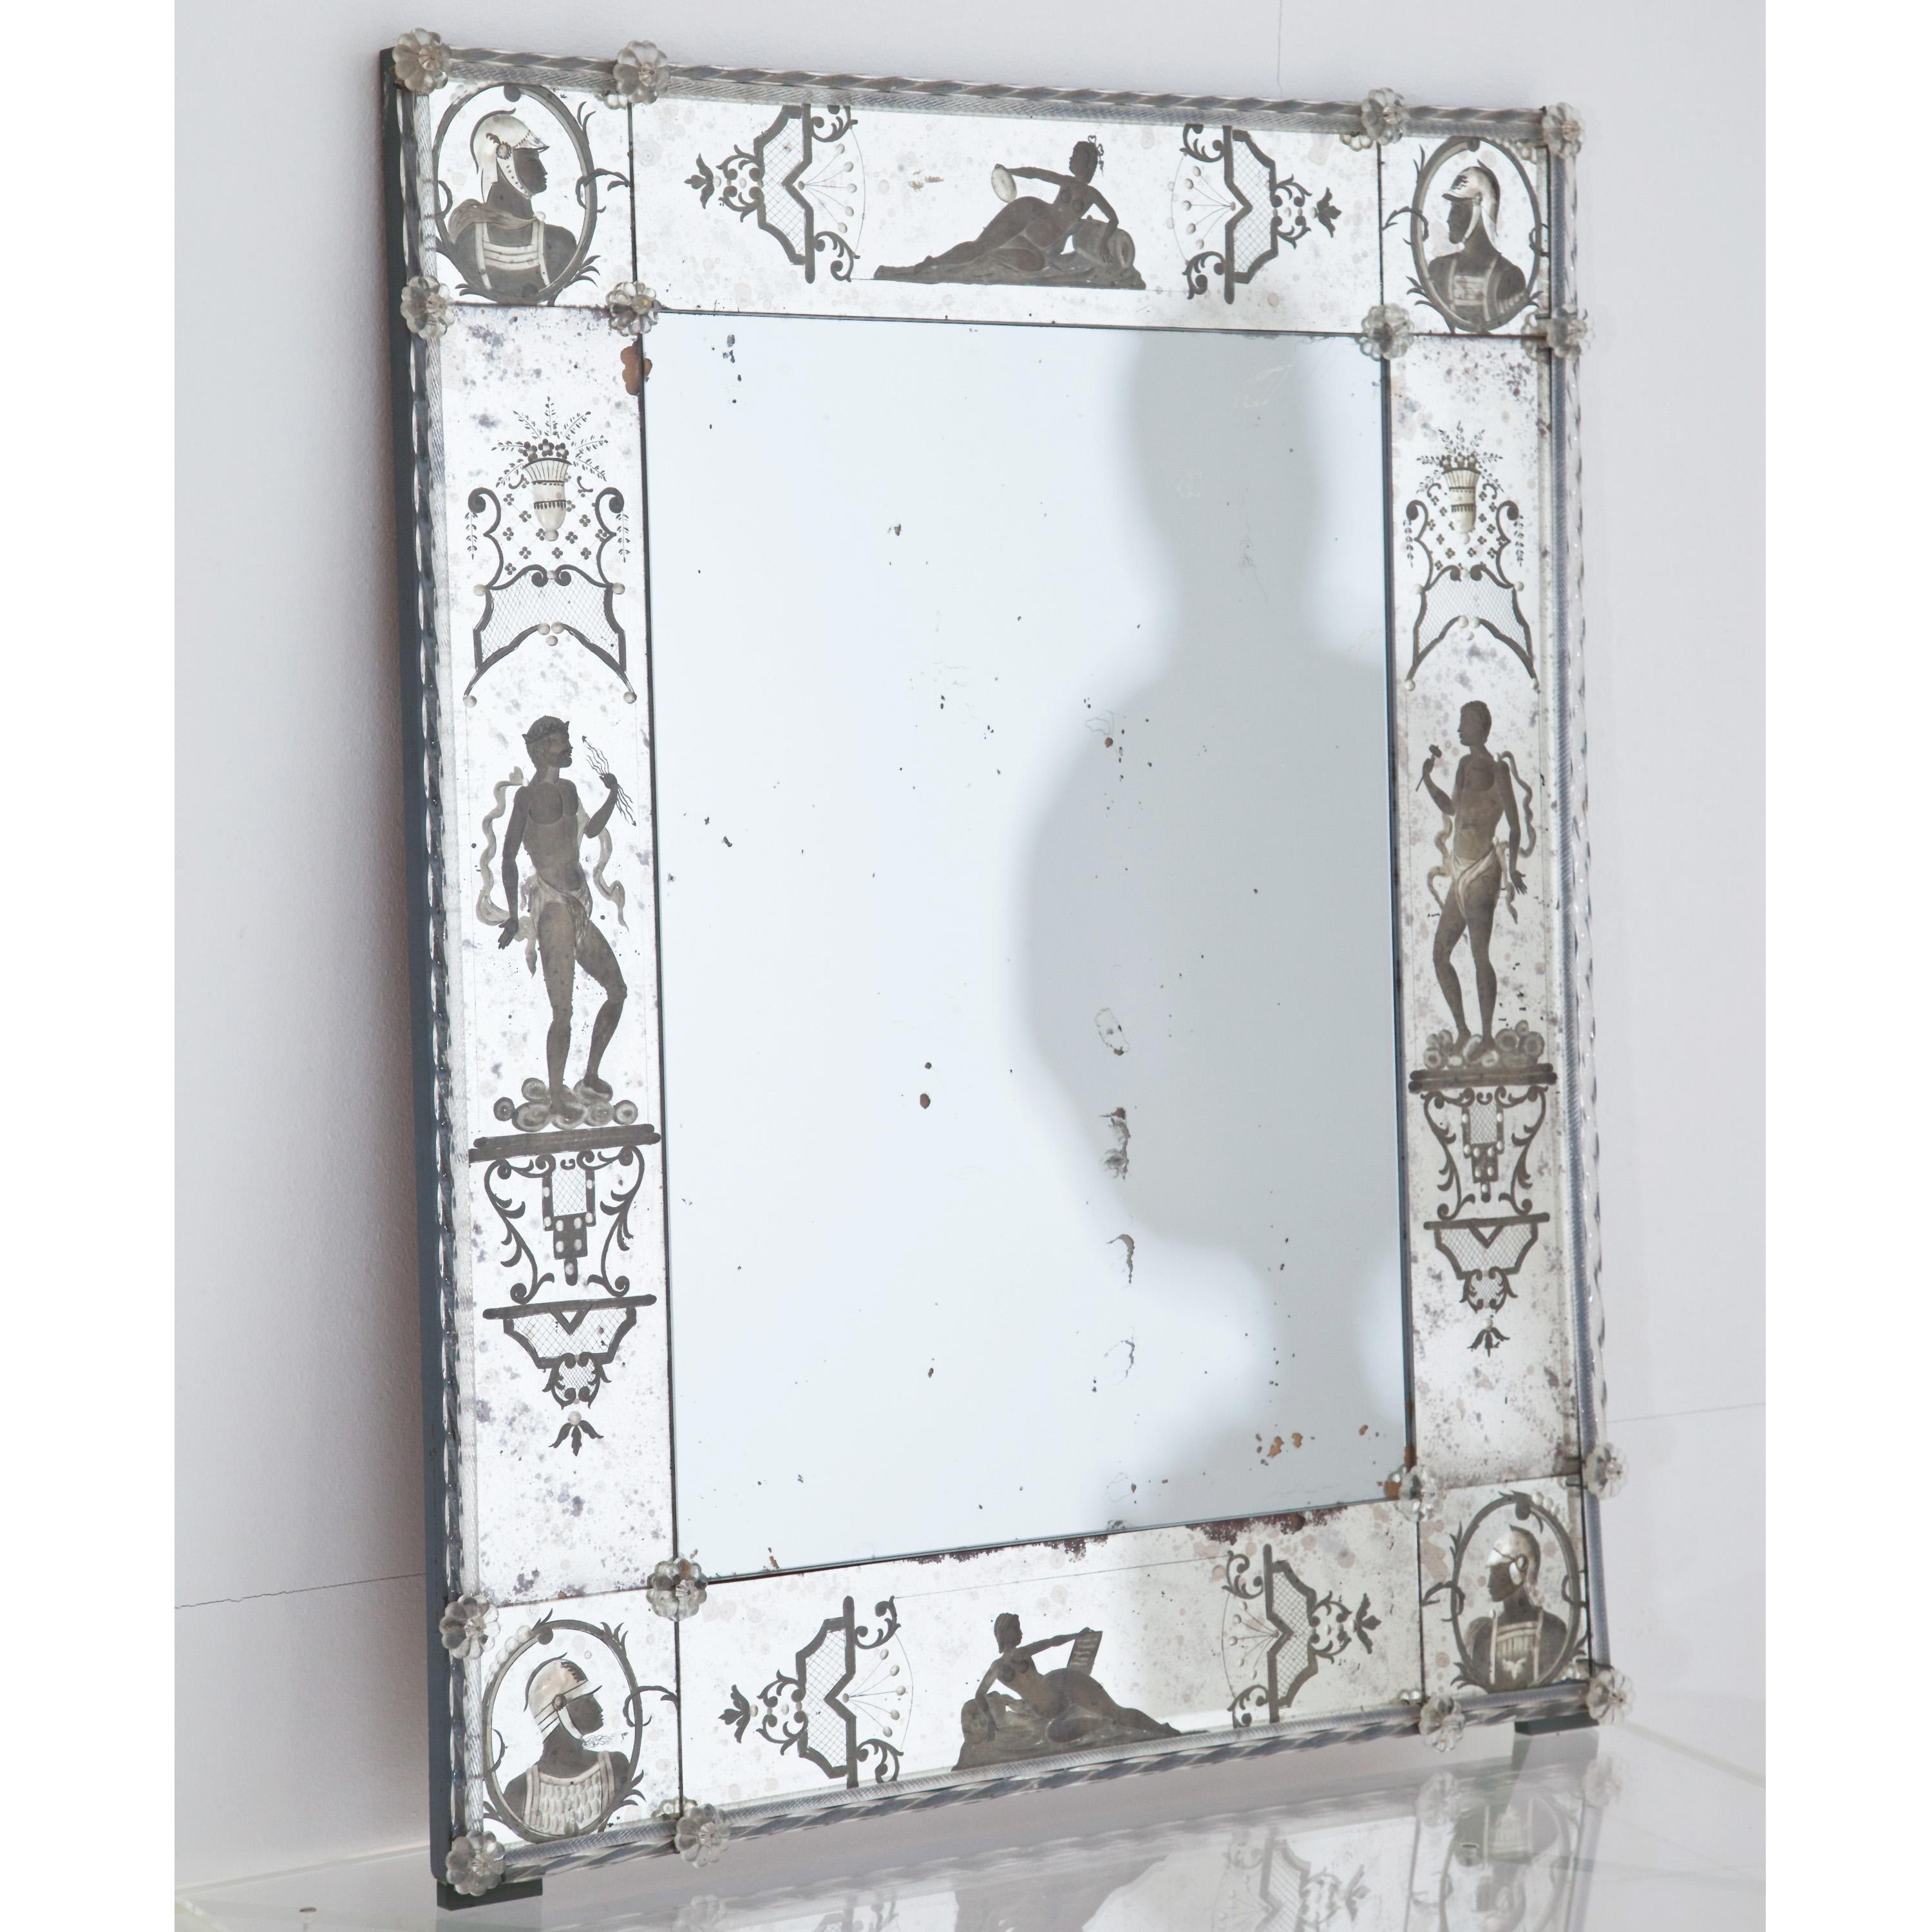 Rectangular wall mirror with a narrow frame and floral decoration out of glass and etched figure decorations around the edge. The mirror glass is blind in places.